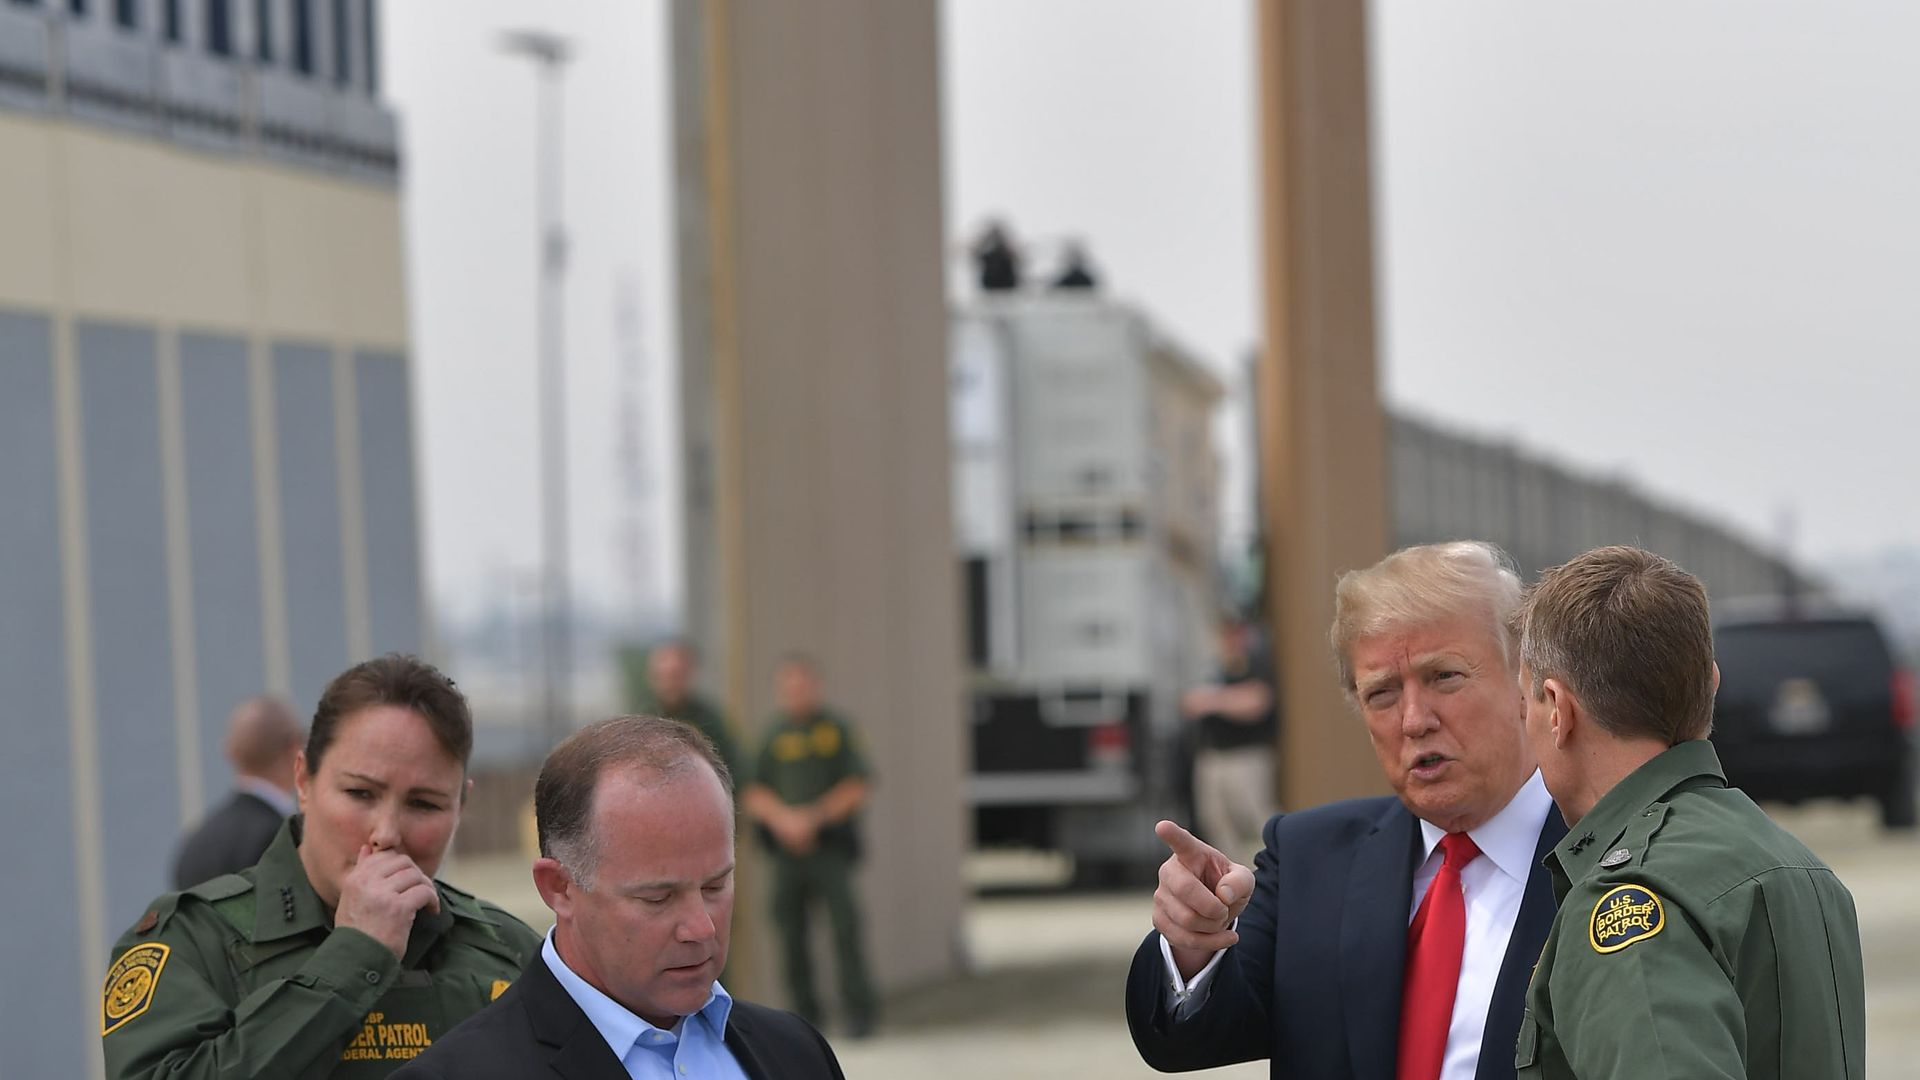  US President Donald Trump is shown border wall prototypes in San Diego, California on March 13, 2018.